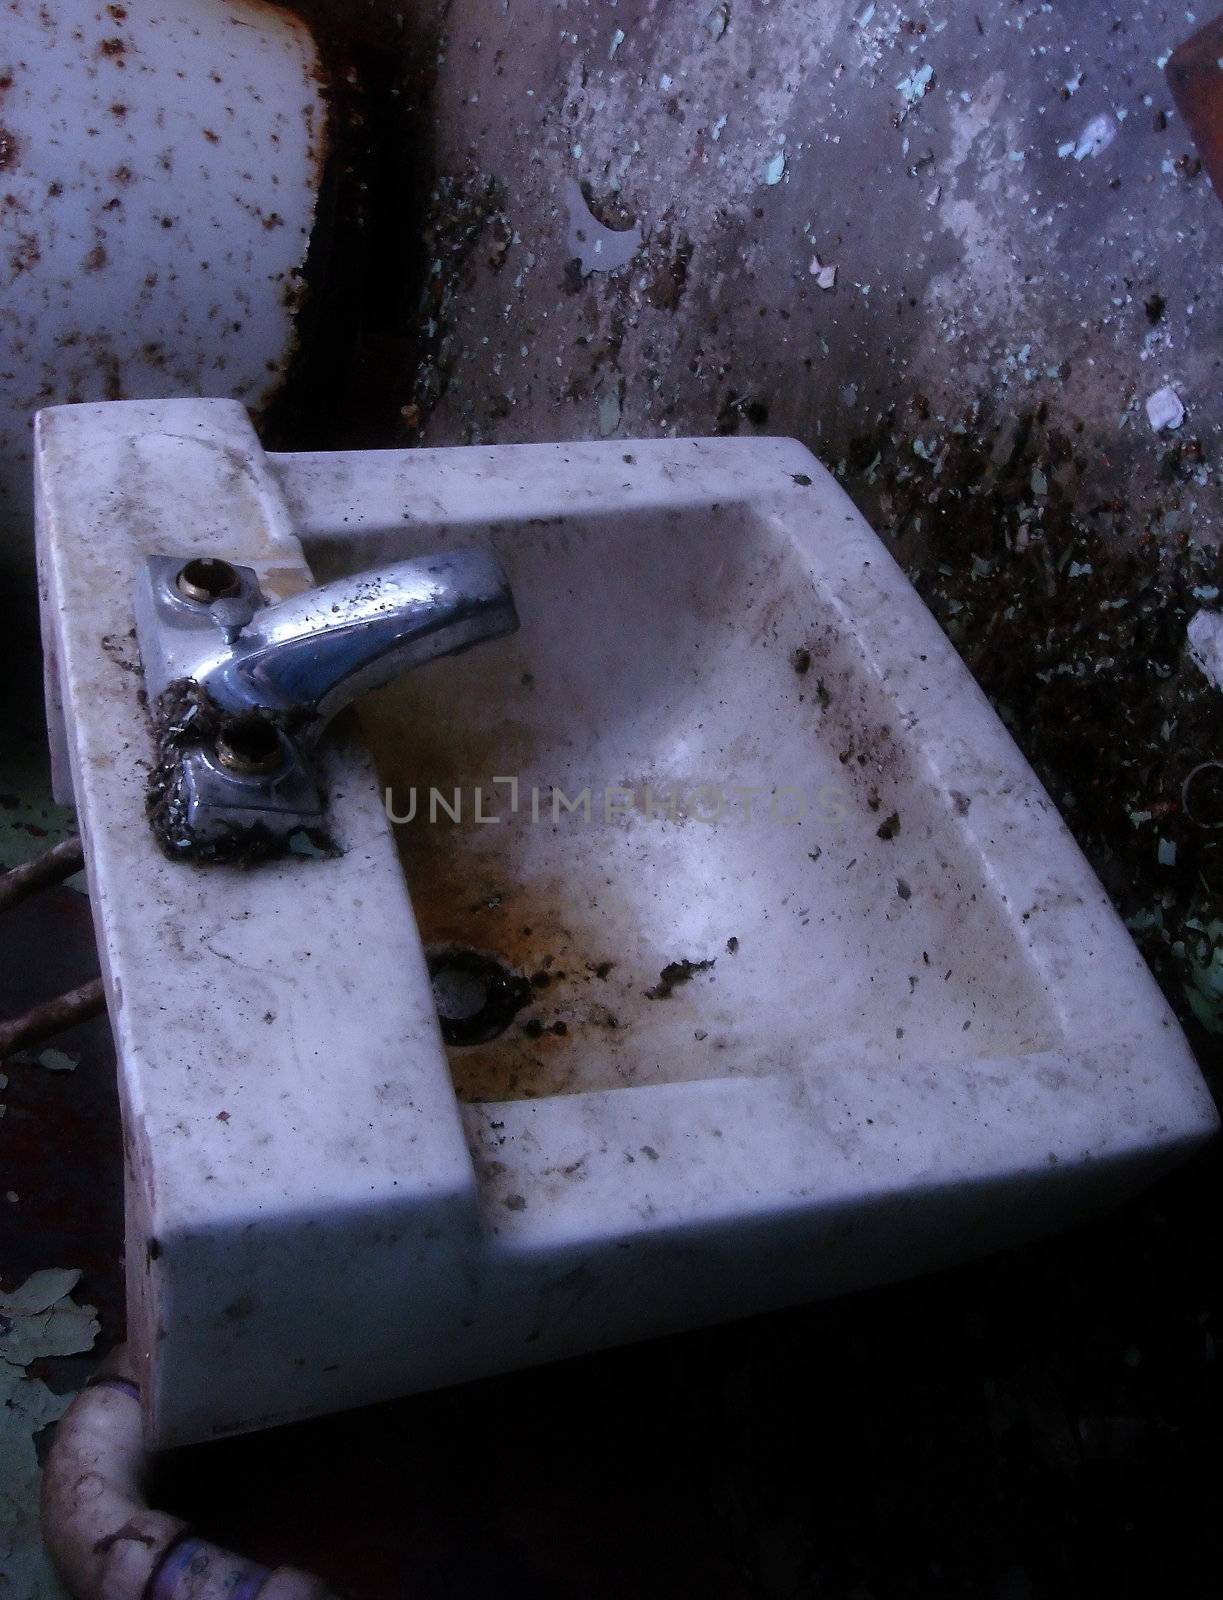 a filthy sink found in an abandoned building
